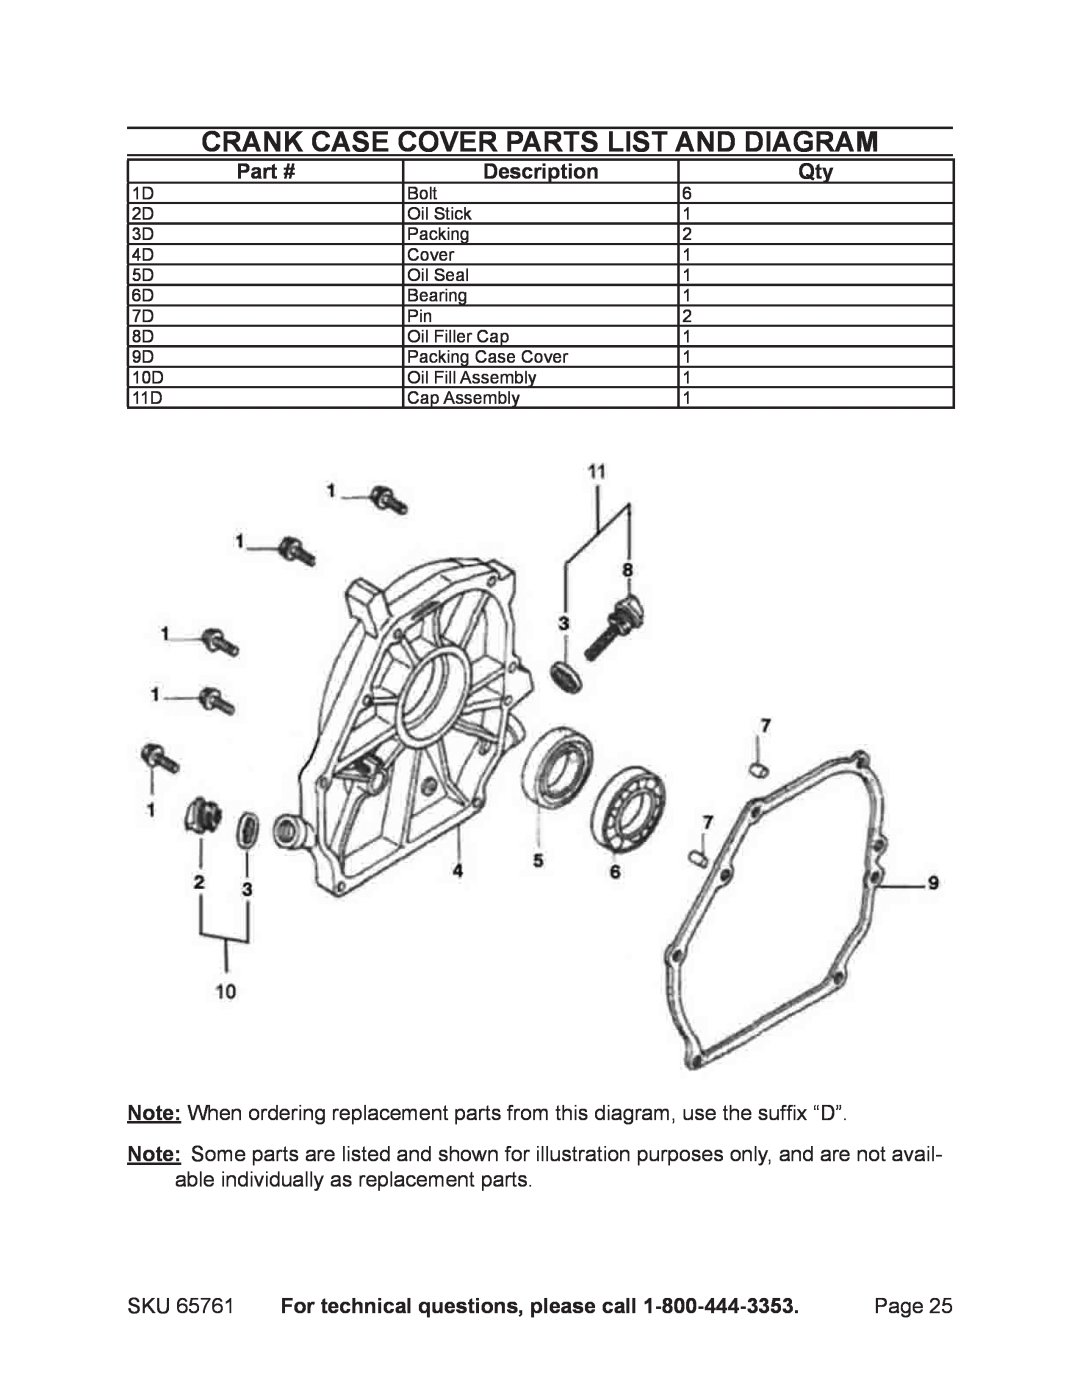 Harbor Freight Tools 65761 Crank case cover parts list and diagram, Description, For technical questions, please call 